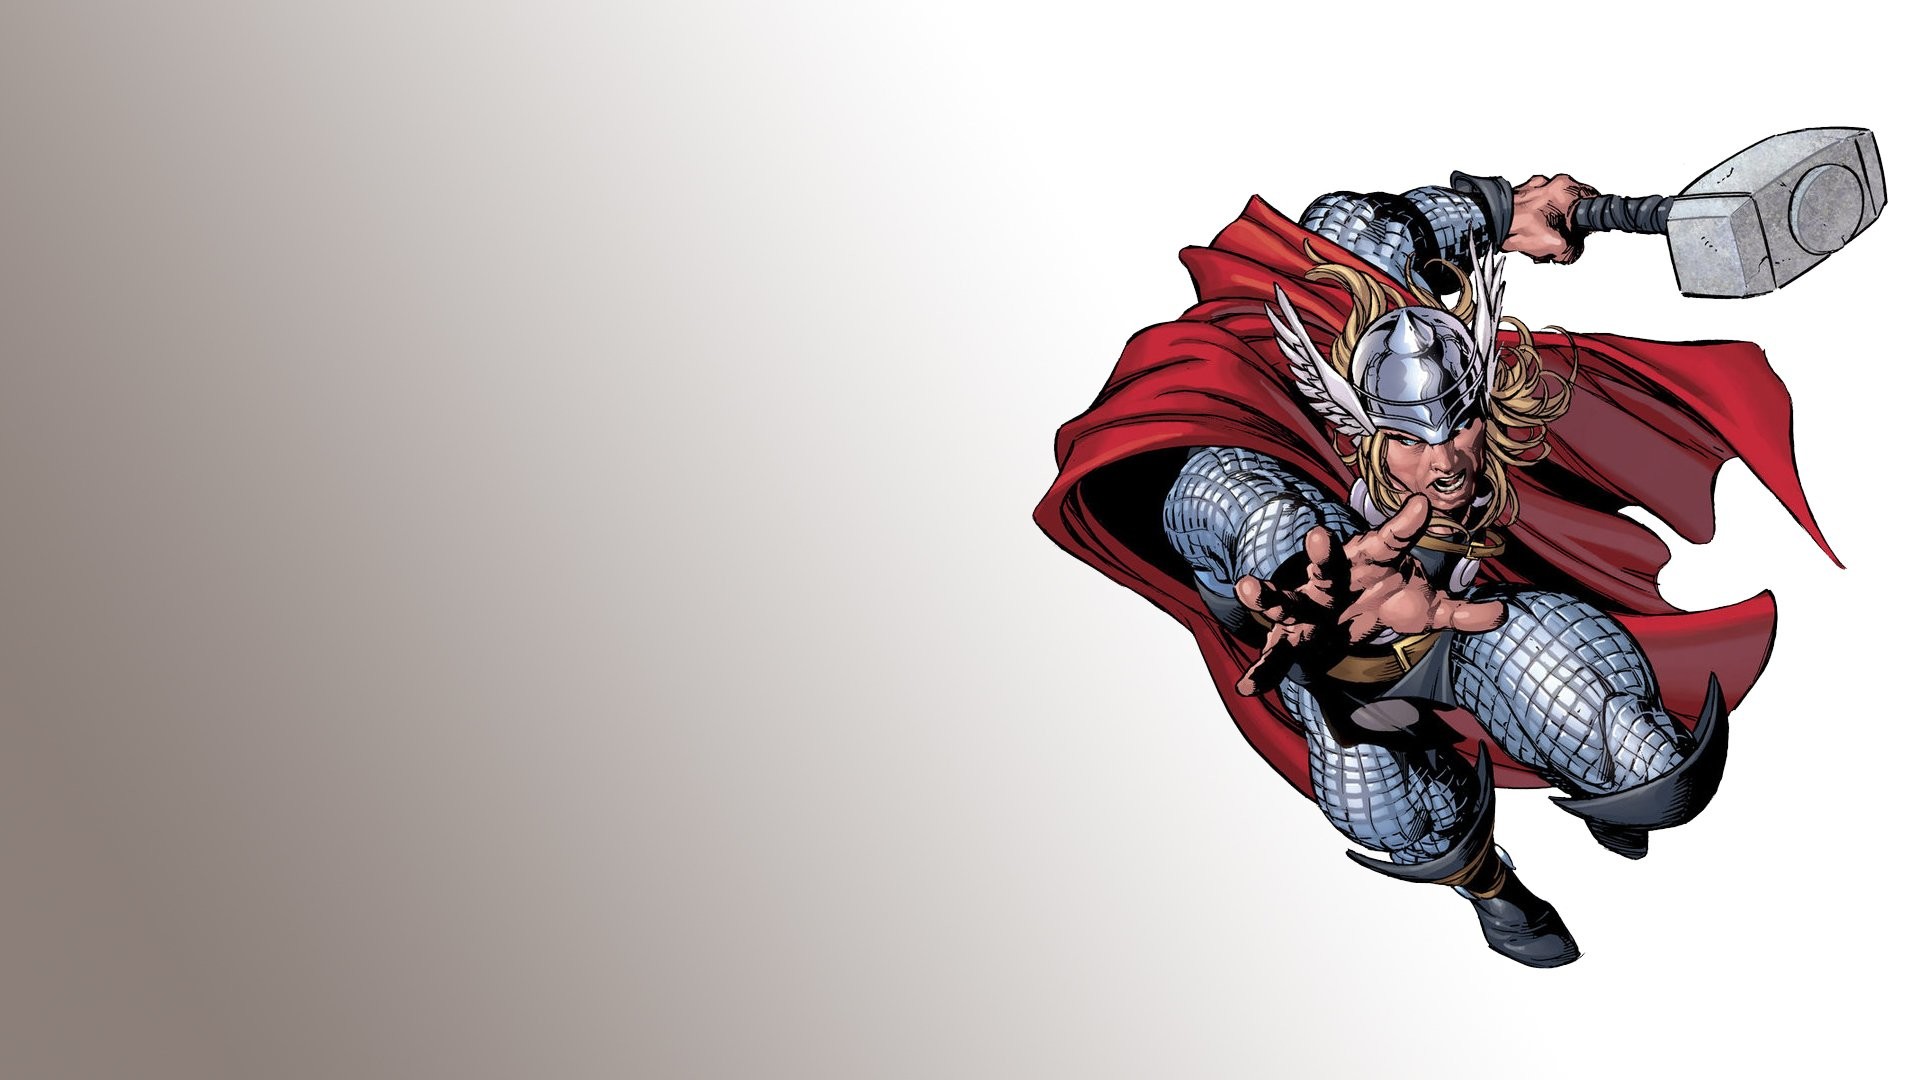 Thor Wallpaper Hd 77 Images